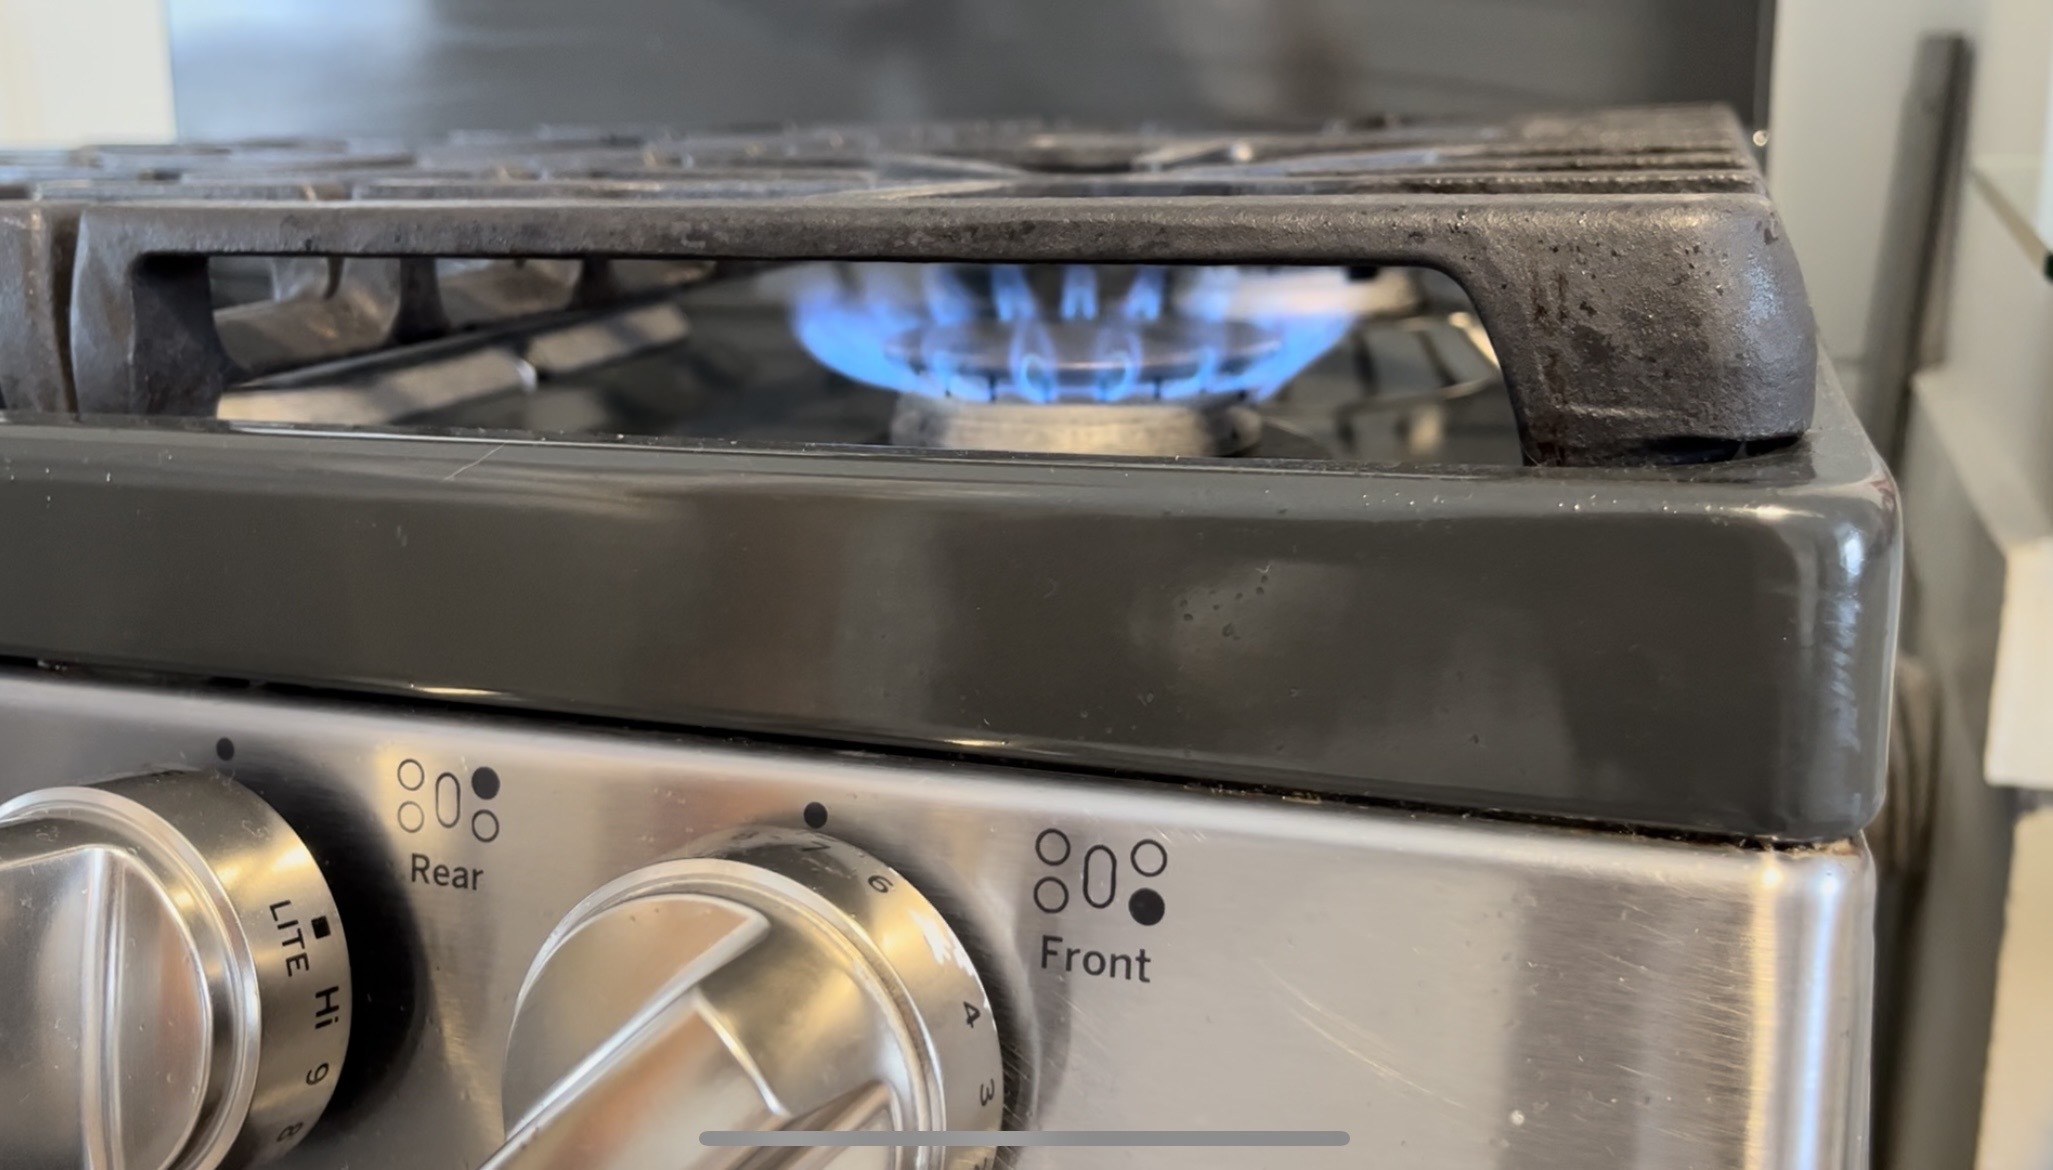 Electric stoves may be poised to dethrone the mighty gas range